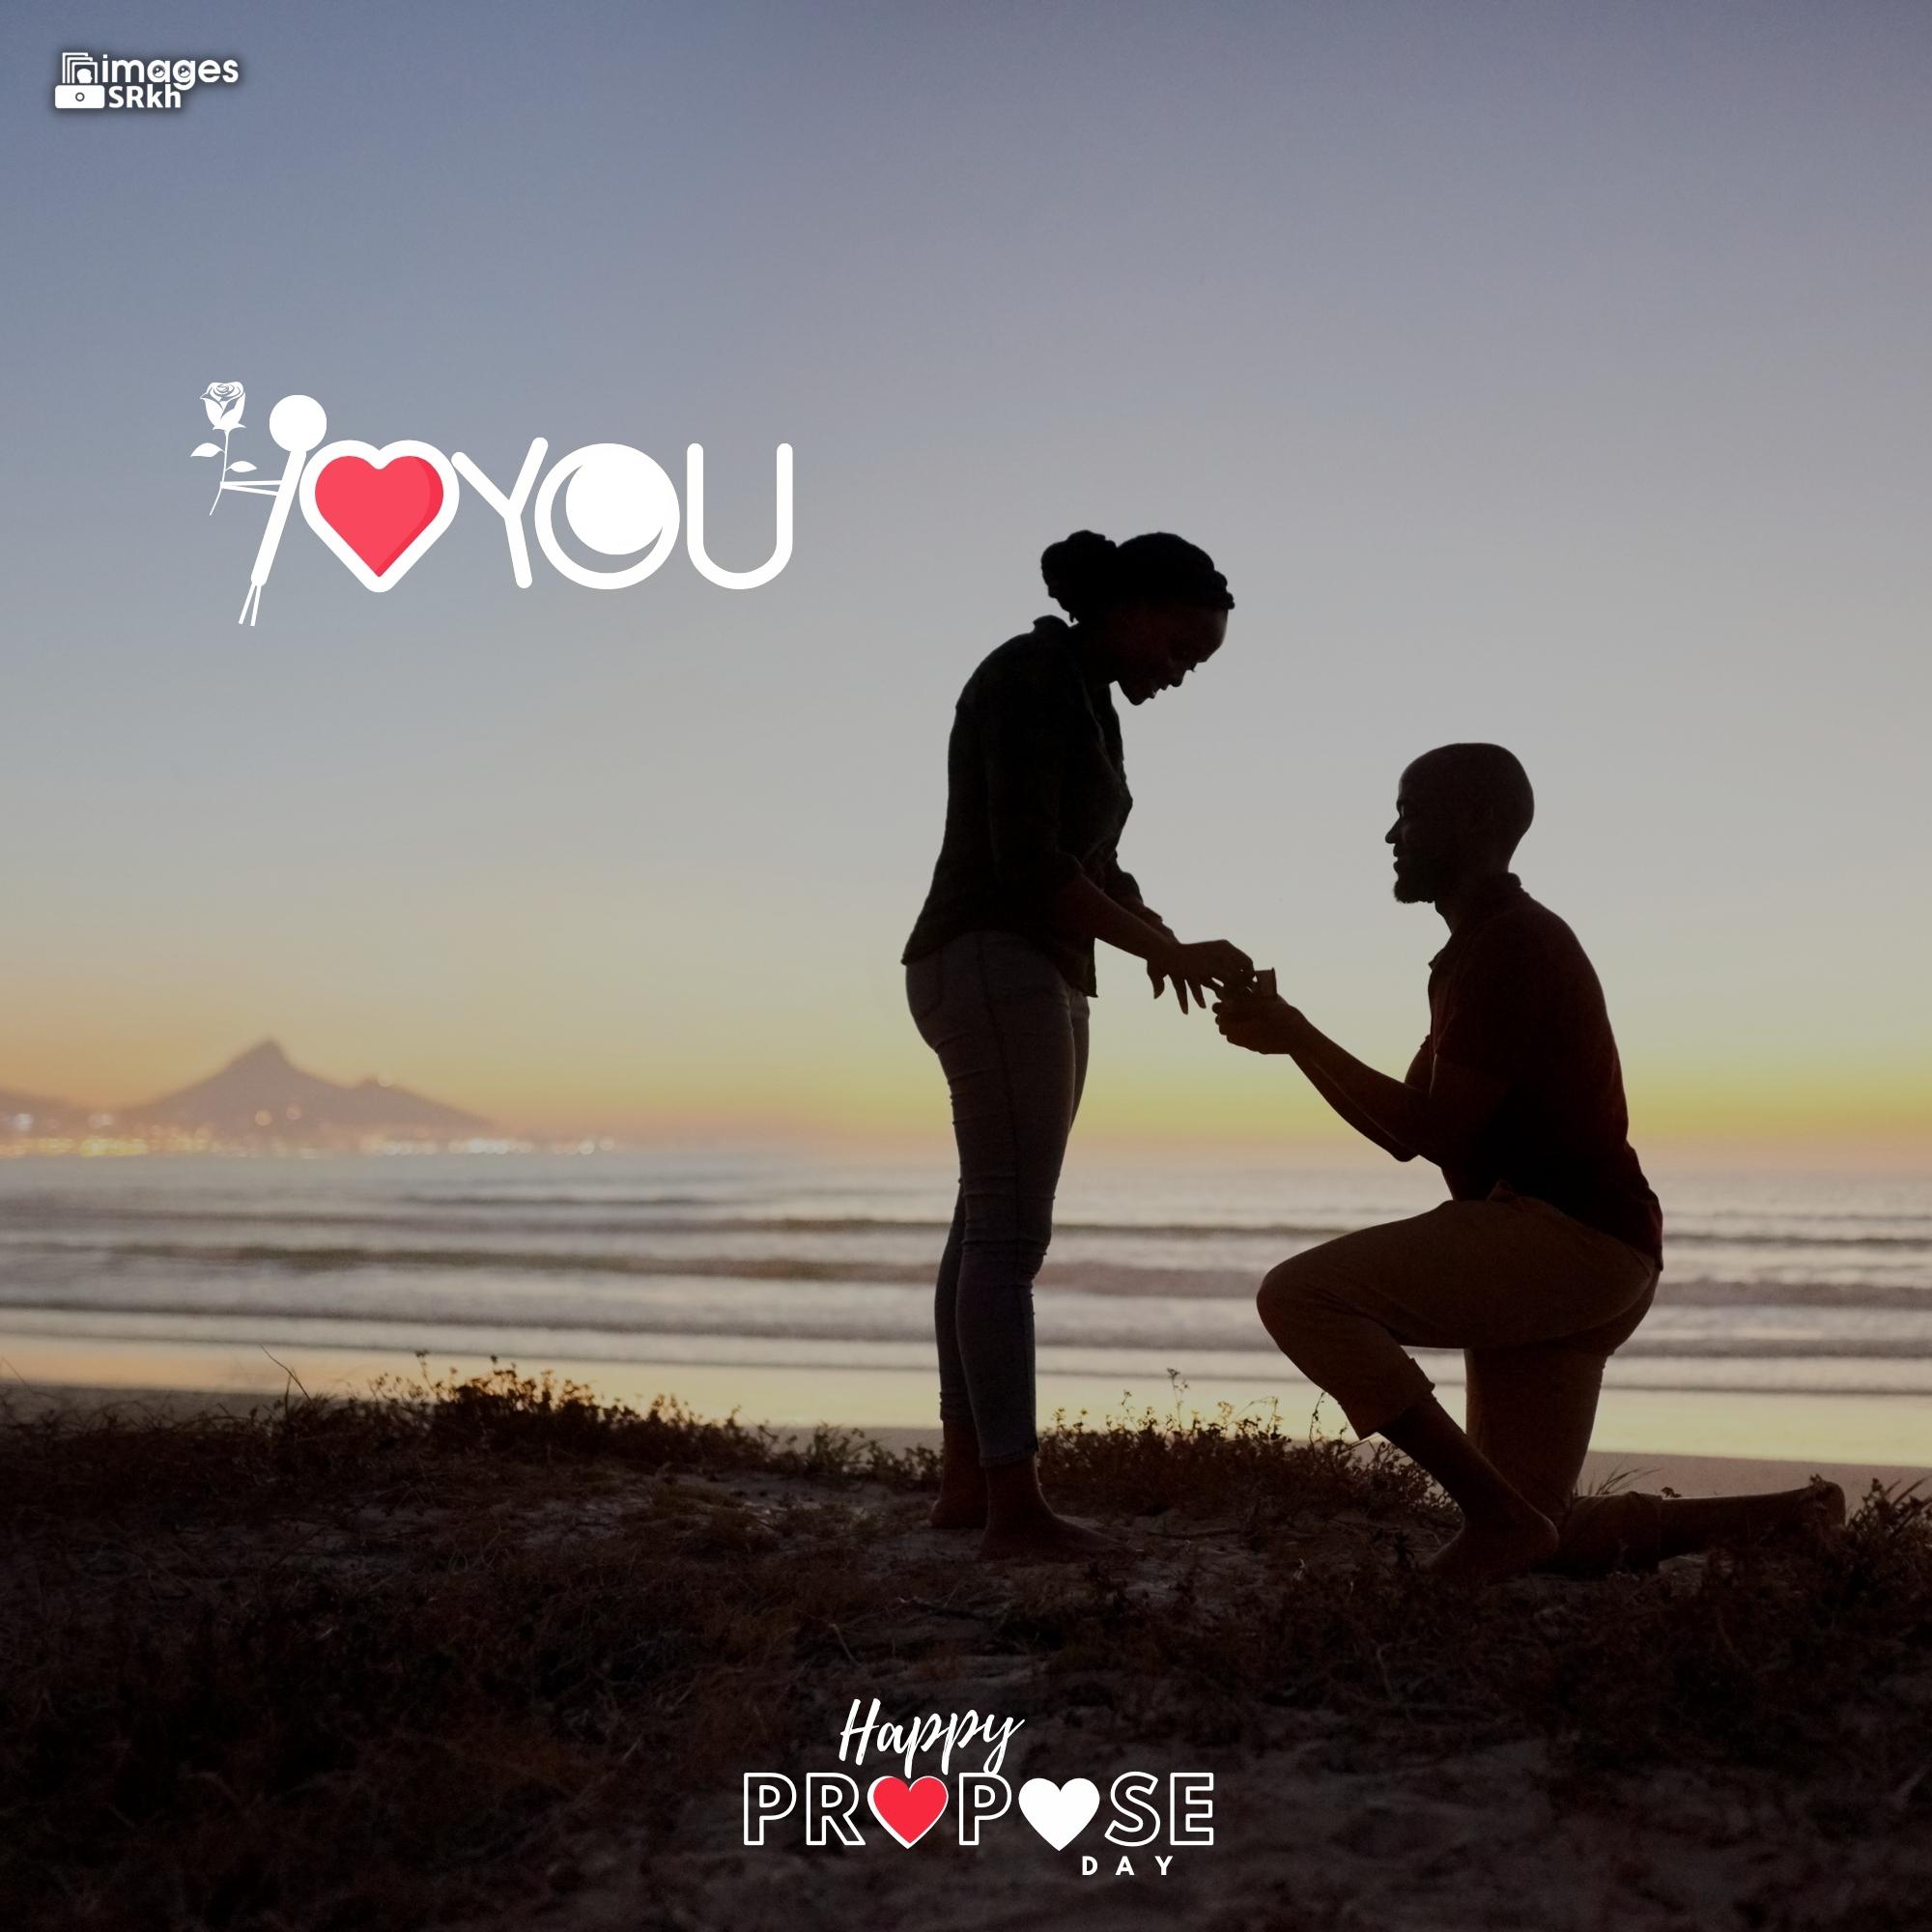 Happy Propose Day Images | 331 | I LOVE YOU